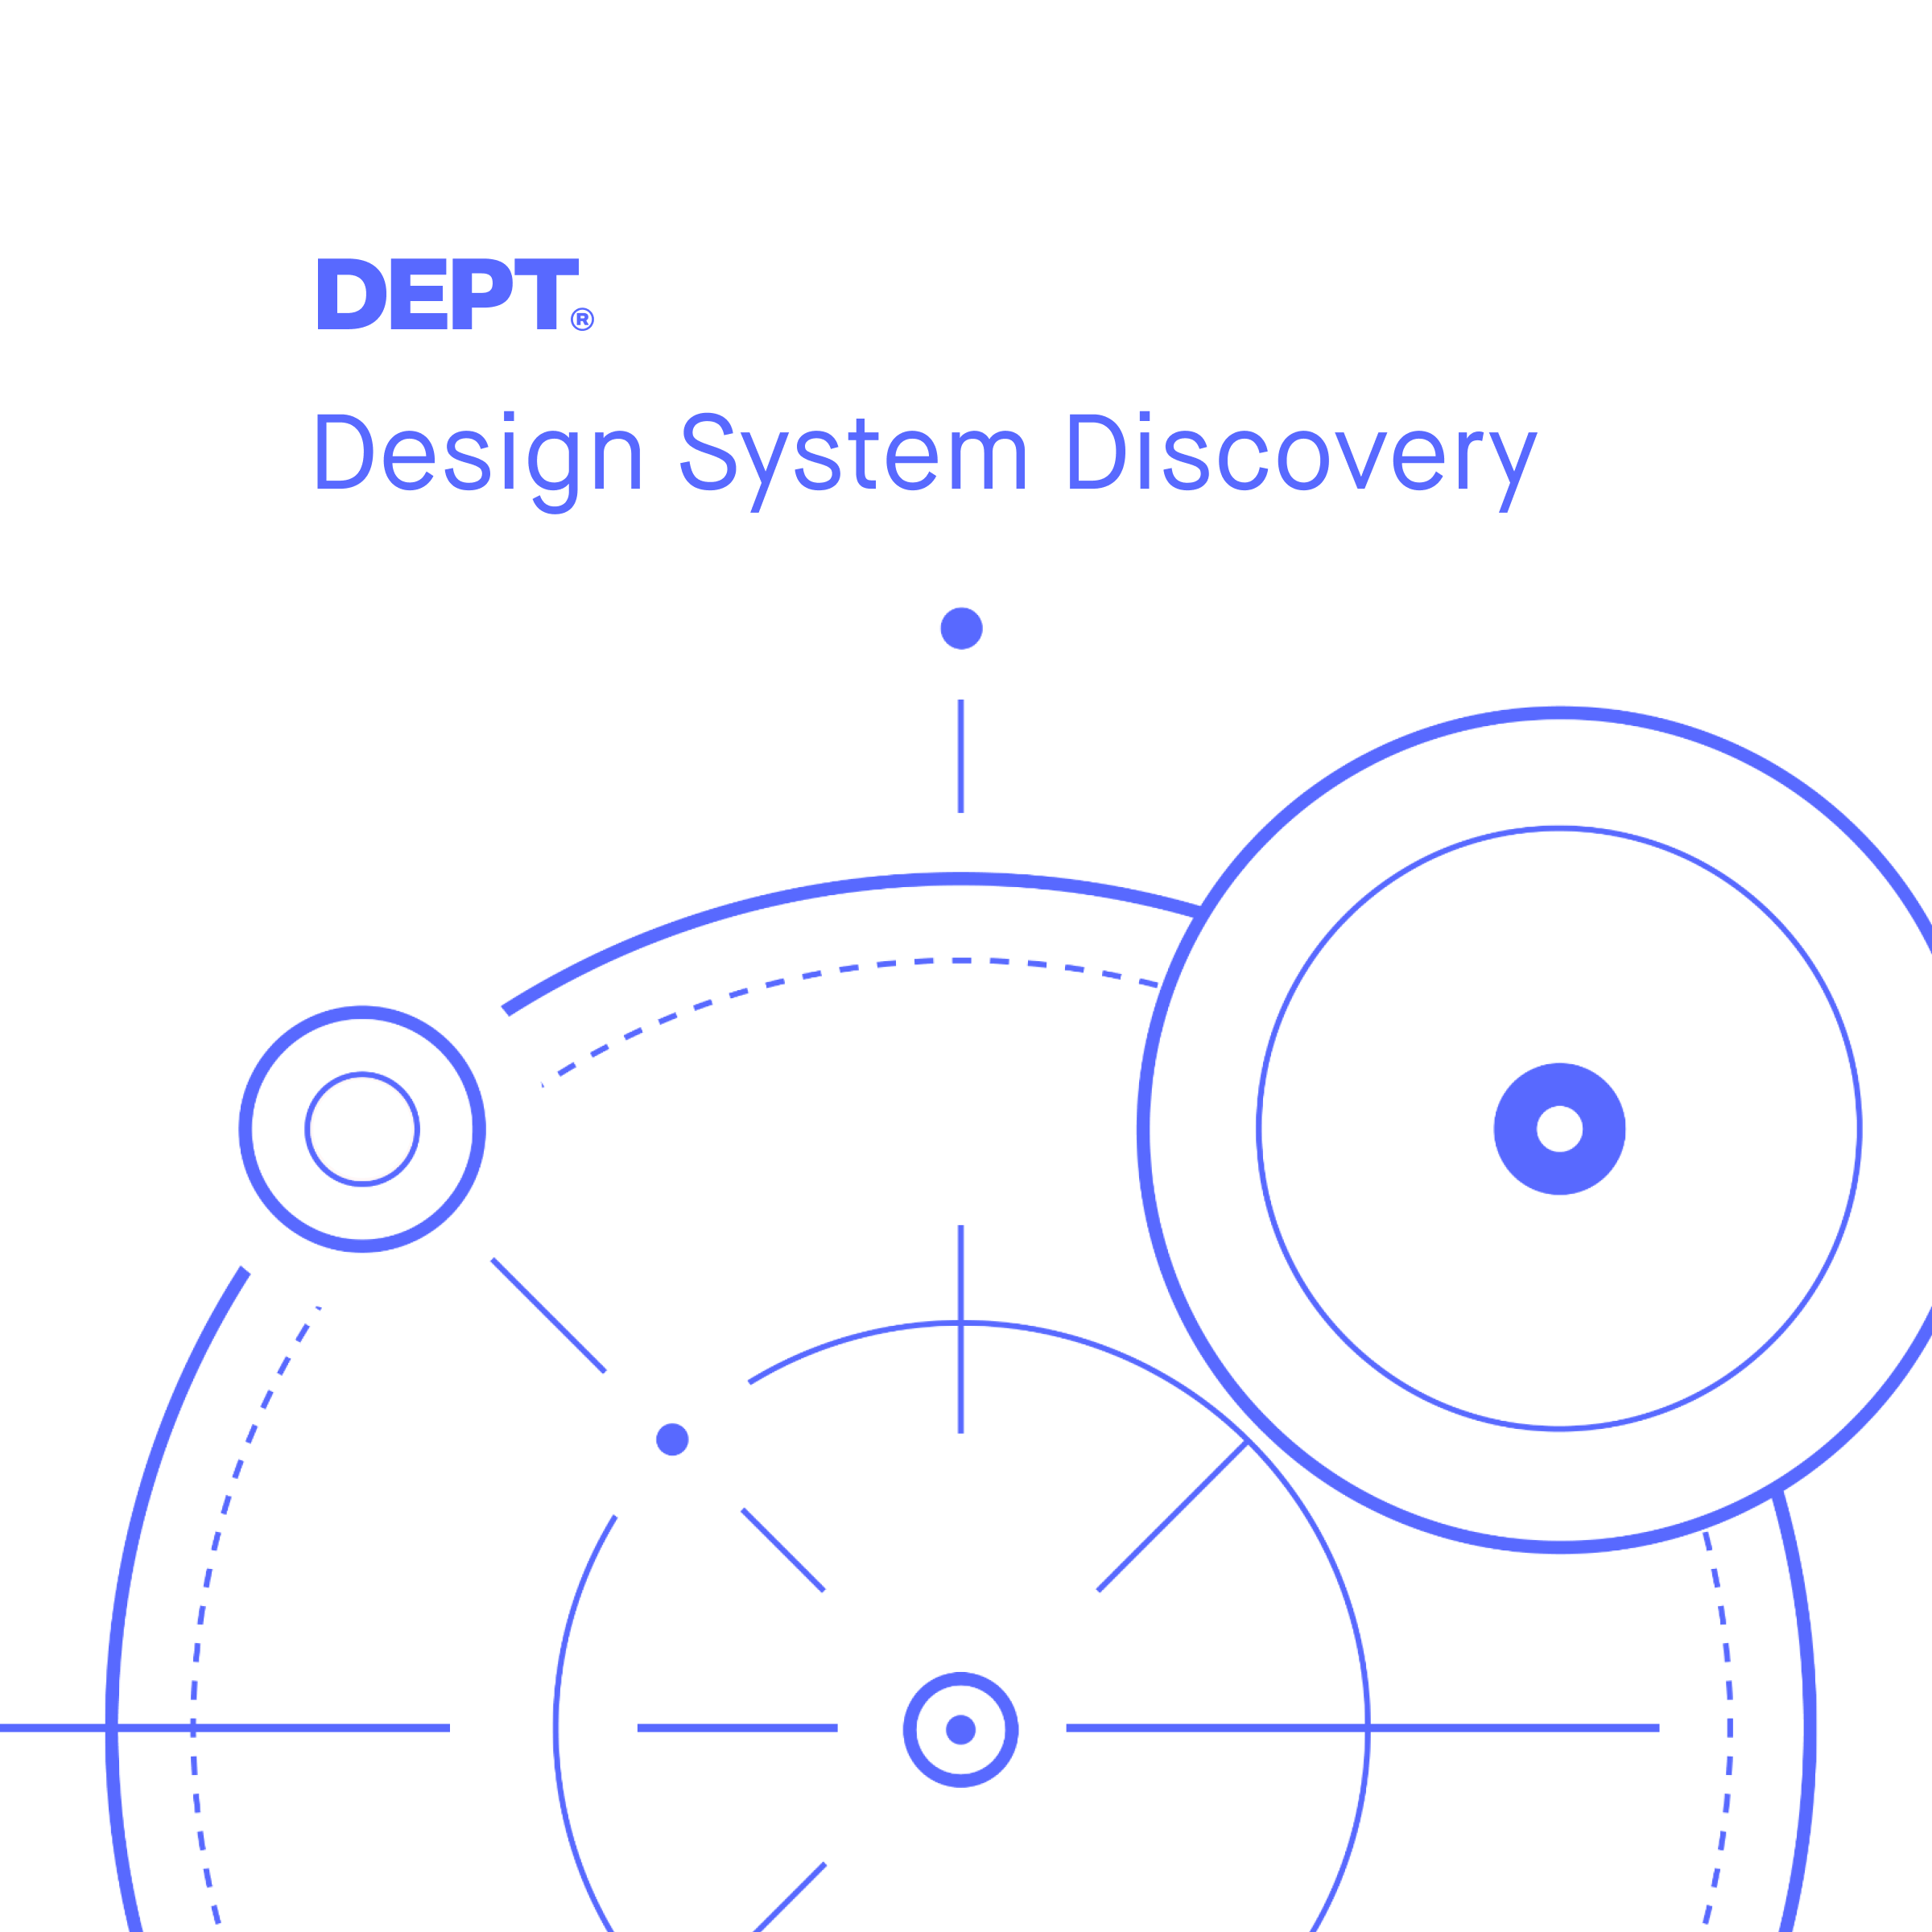 How to: Die Design System Discovery